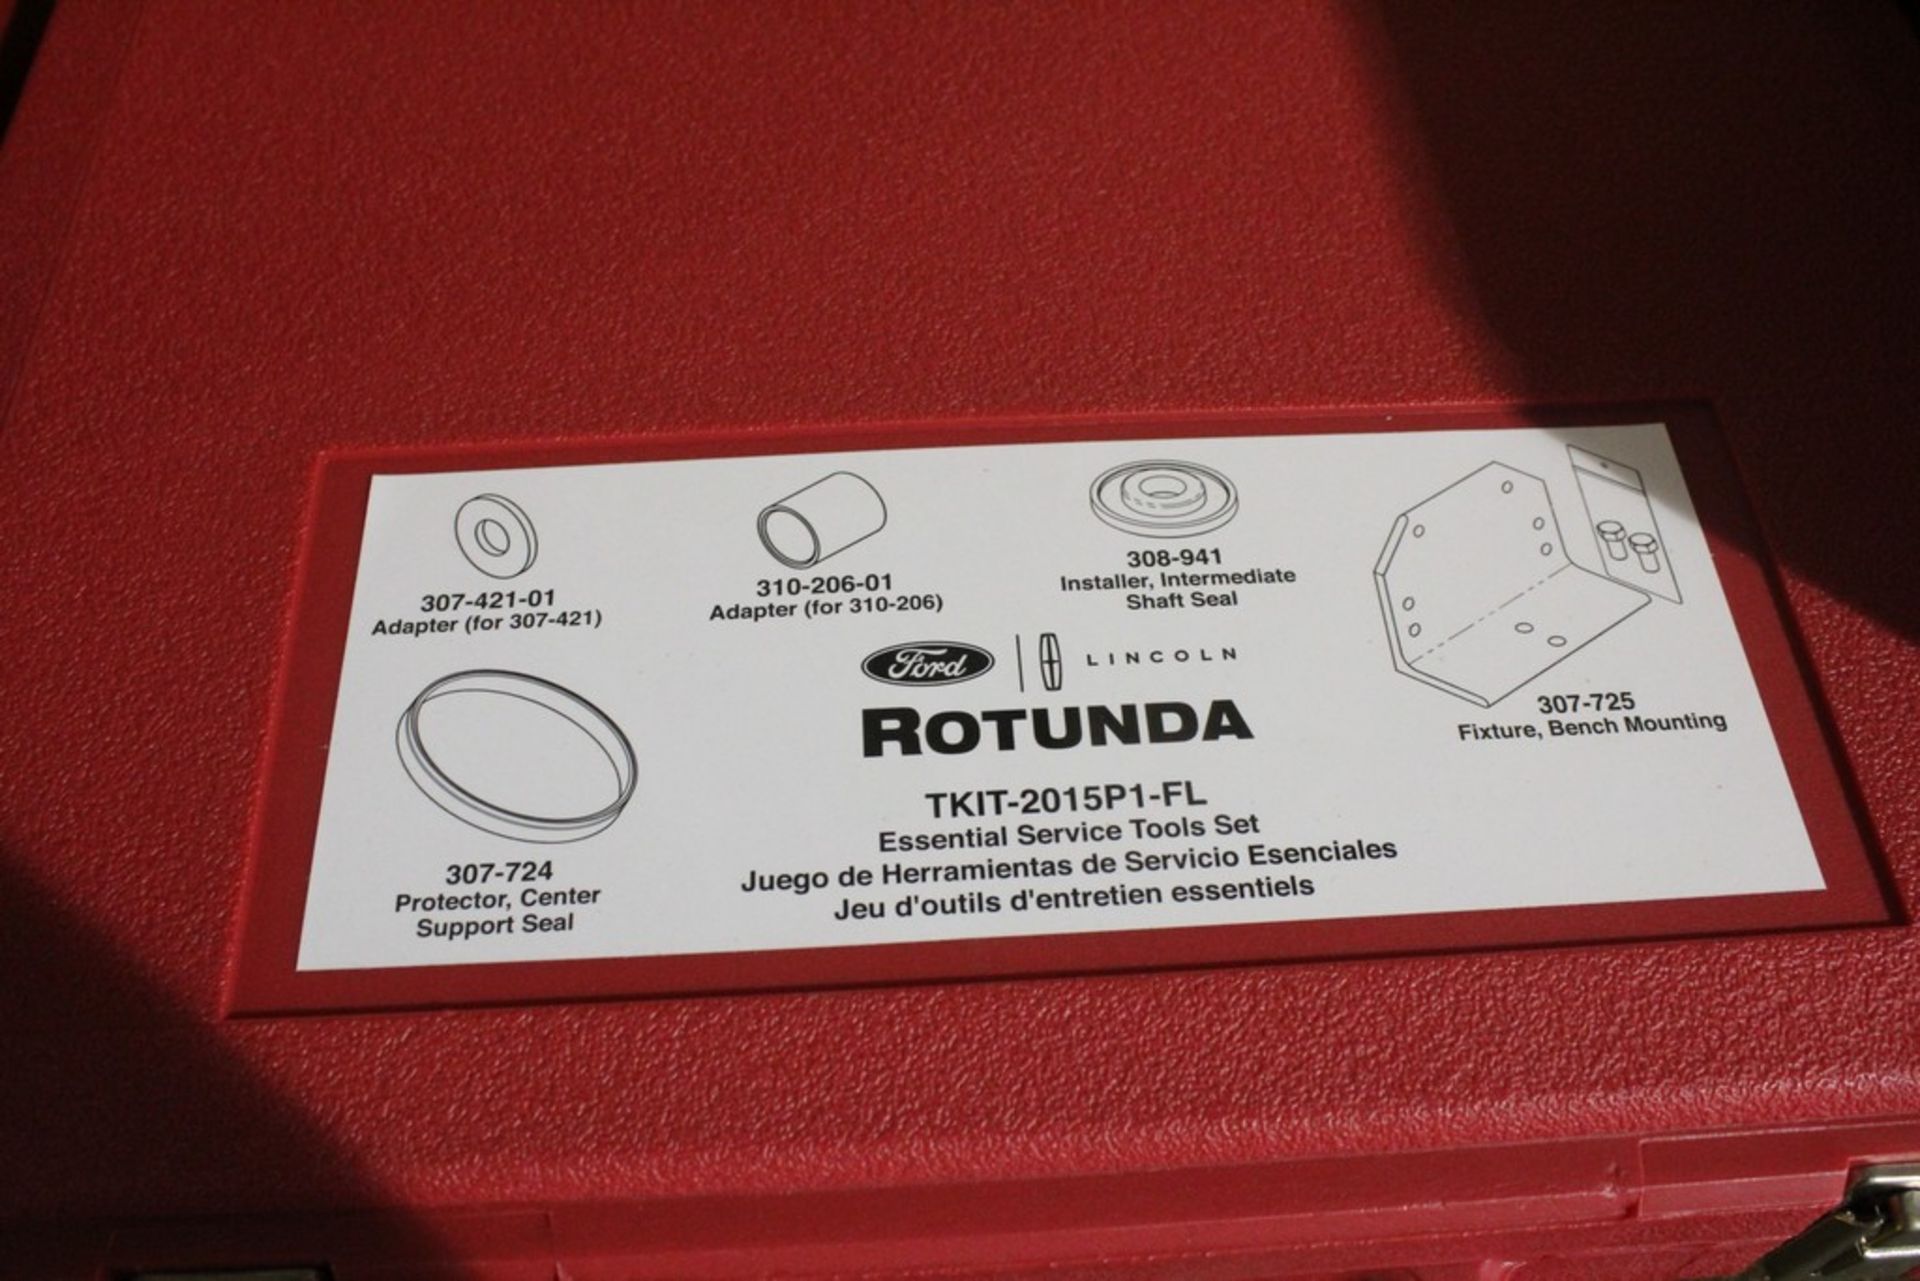 FORD ROTUNDA ESSENTIAL SERVICE TOOL SET-TKIT-2015P1-FL IN CASE - Image 2 of 3